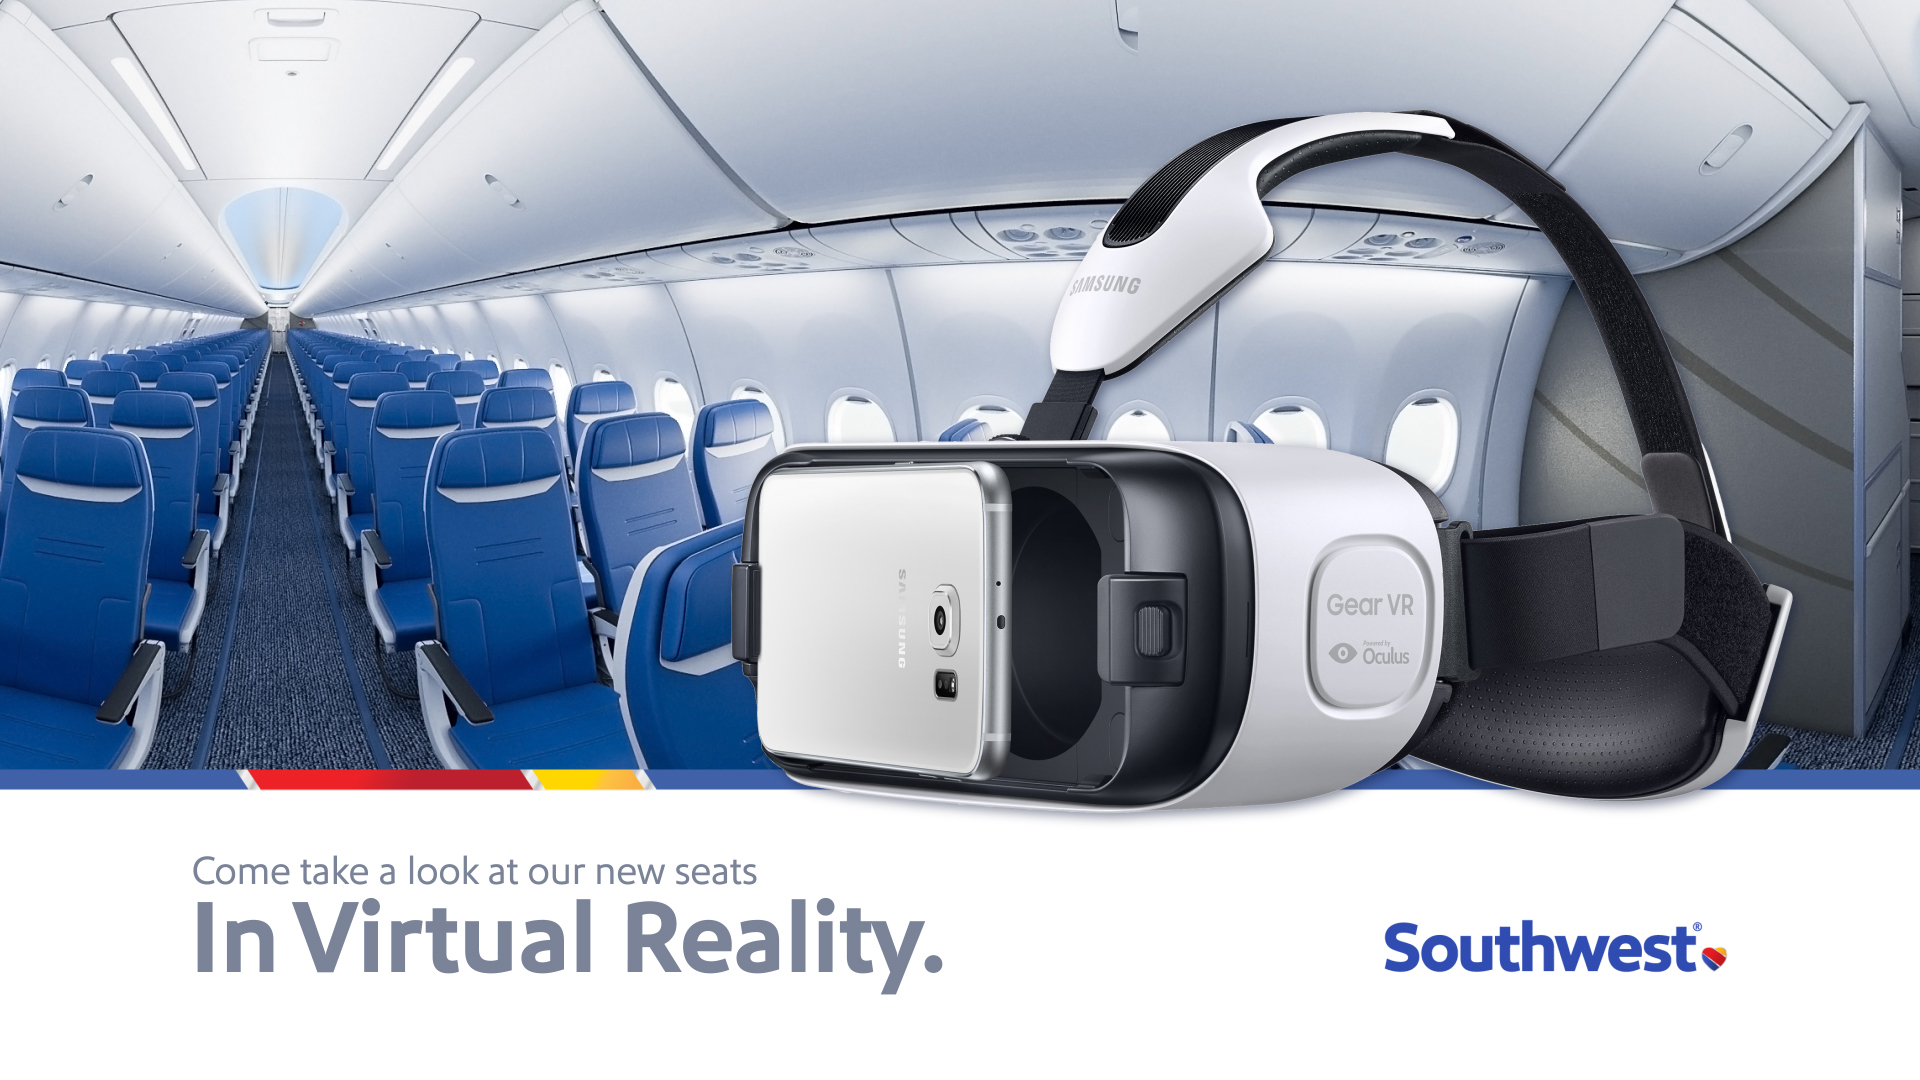 A 360 rendering of a Southwest Airlines aircraft interior with a VR headset superimposed.